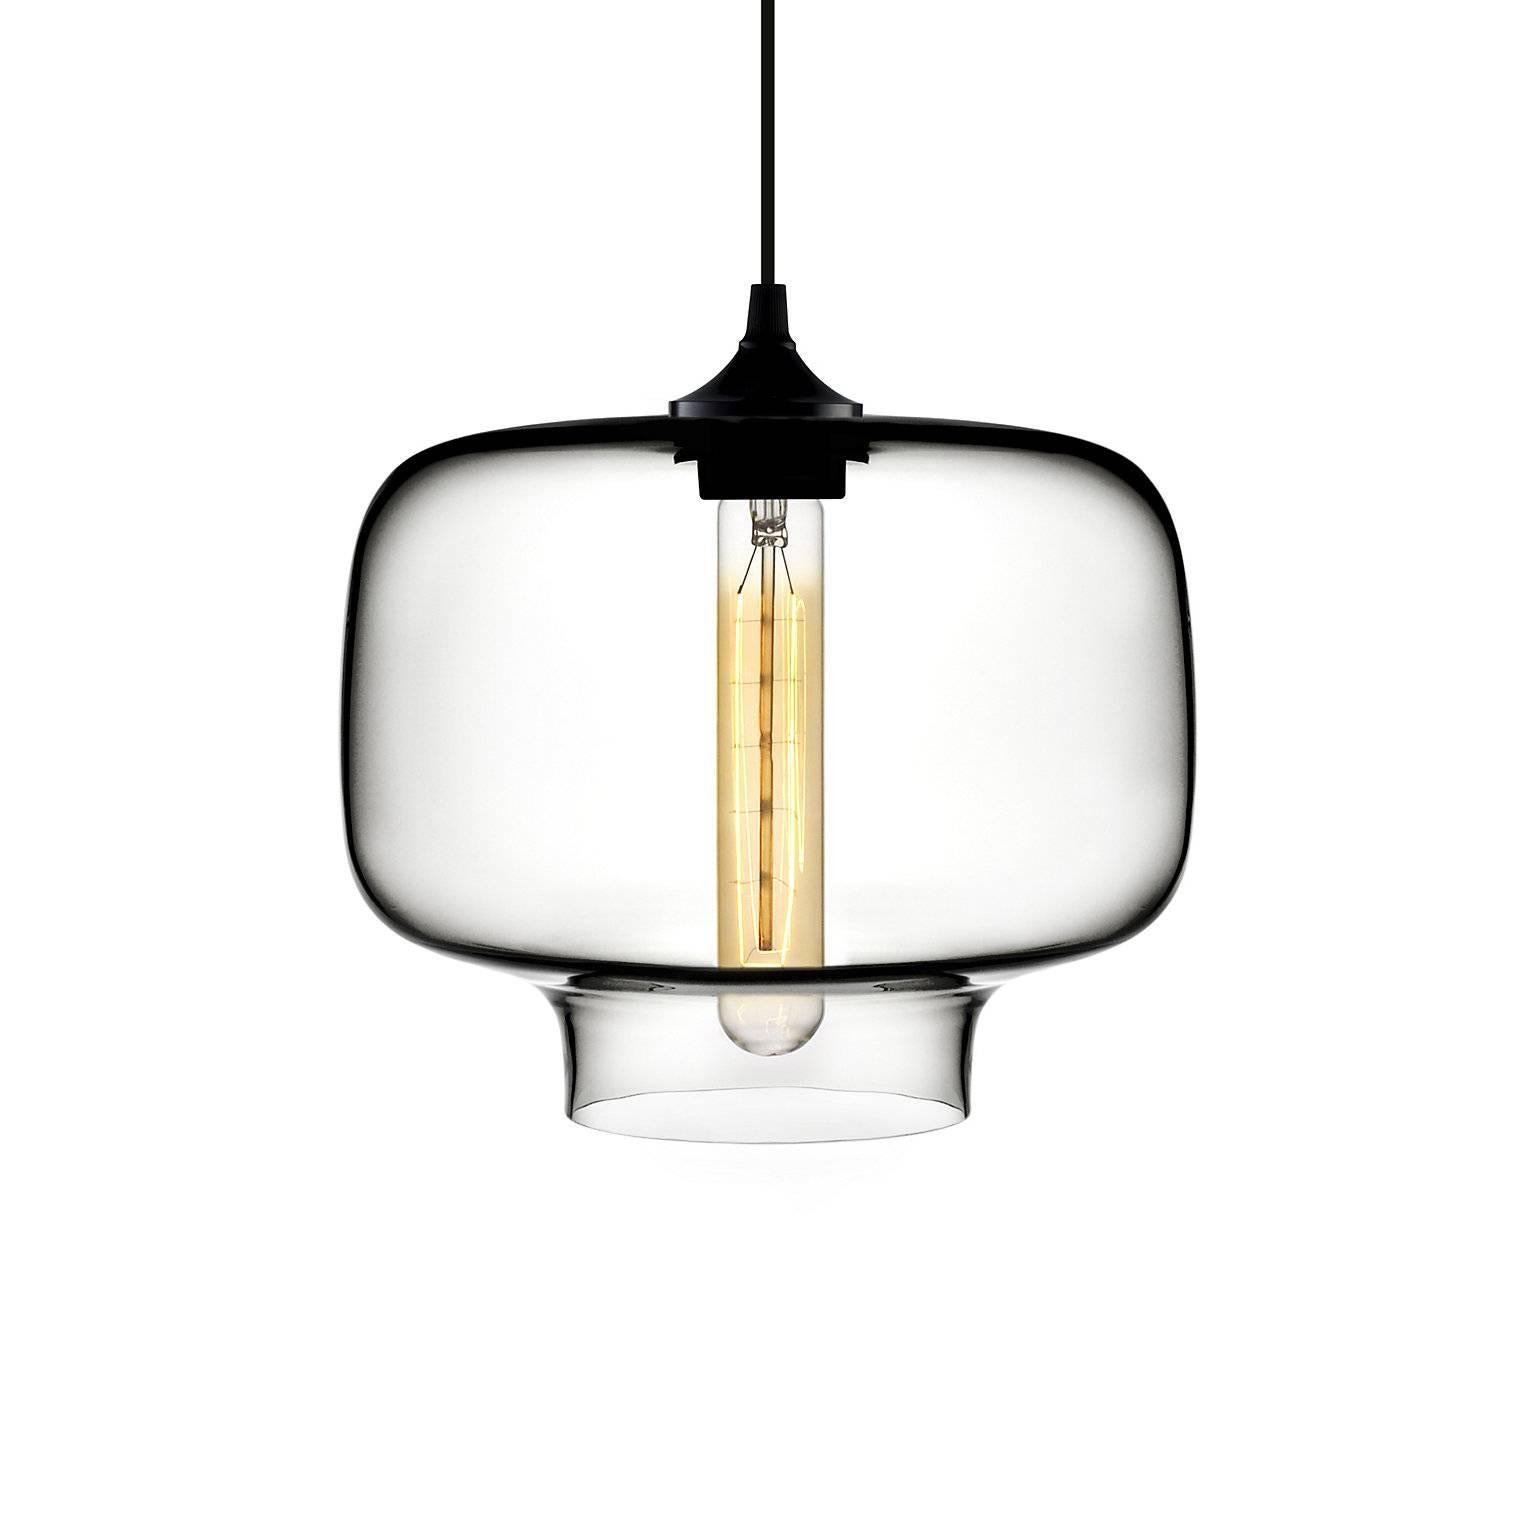 American Oculo Sapphire Handblown Modern Glass Pendant Light, Made in the USA For Sale